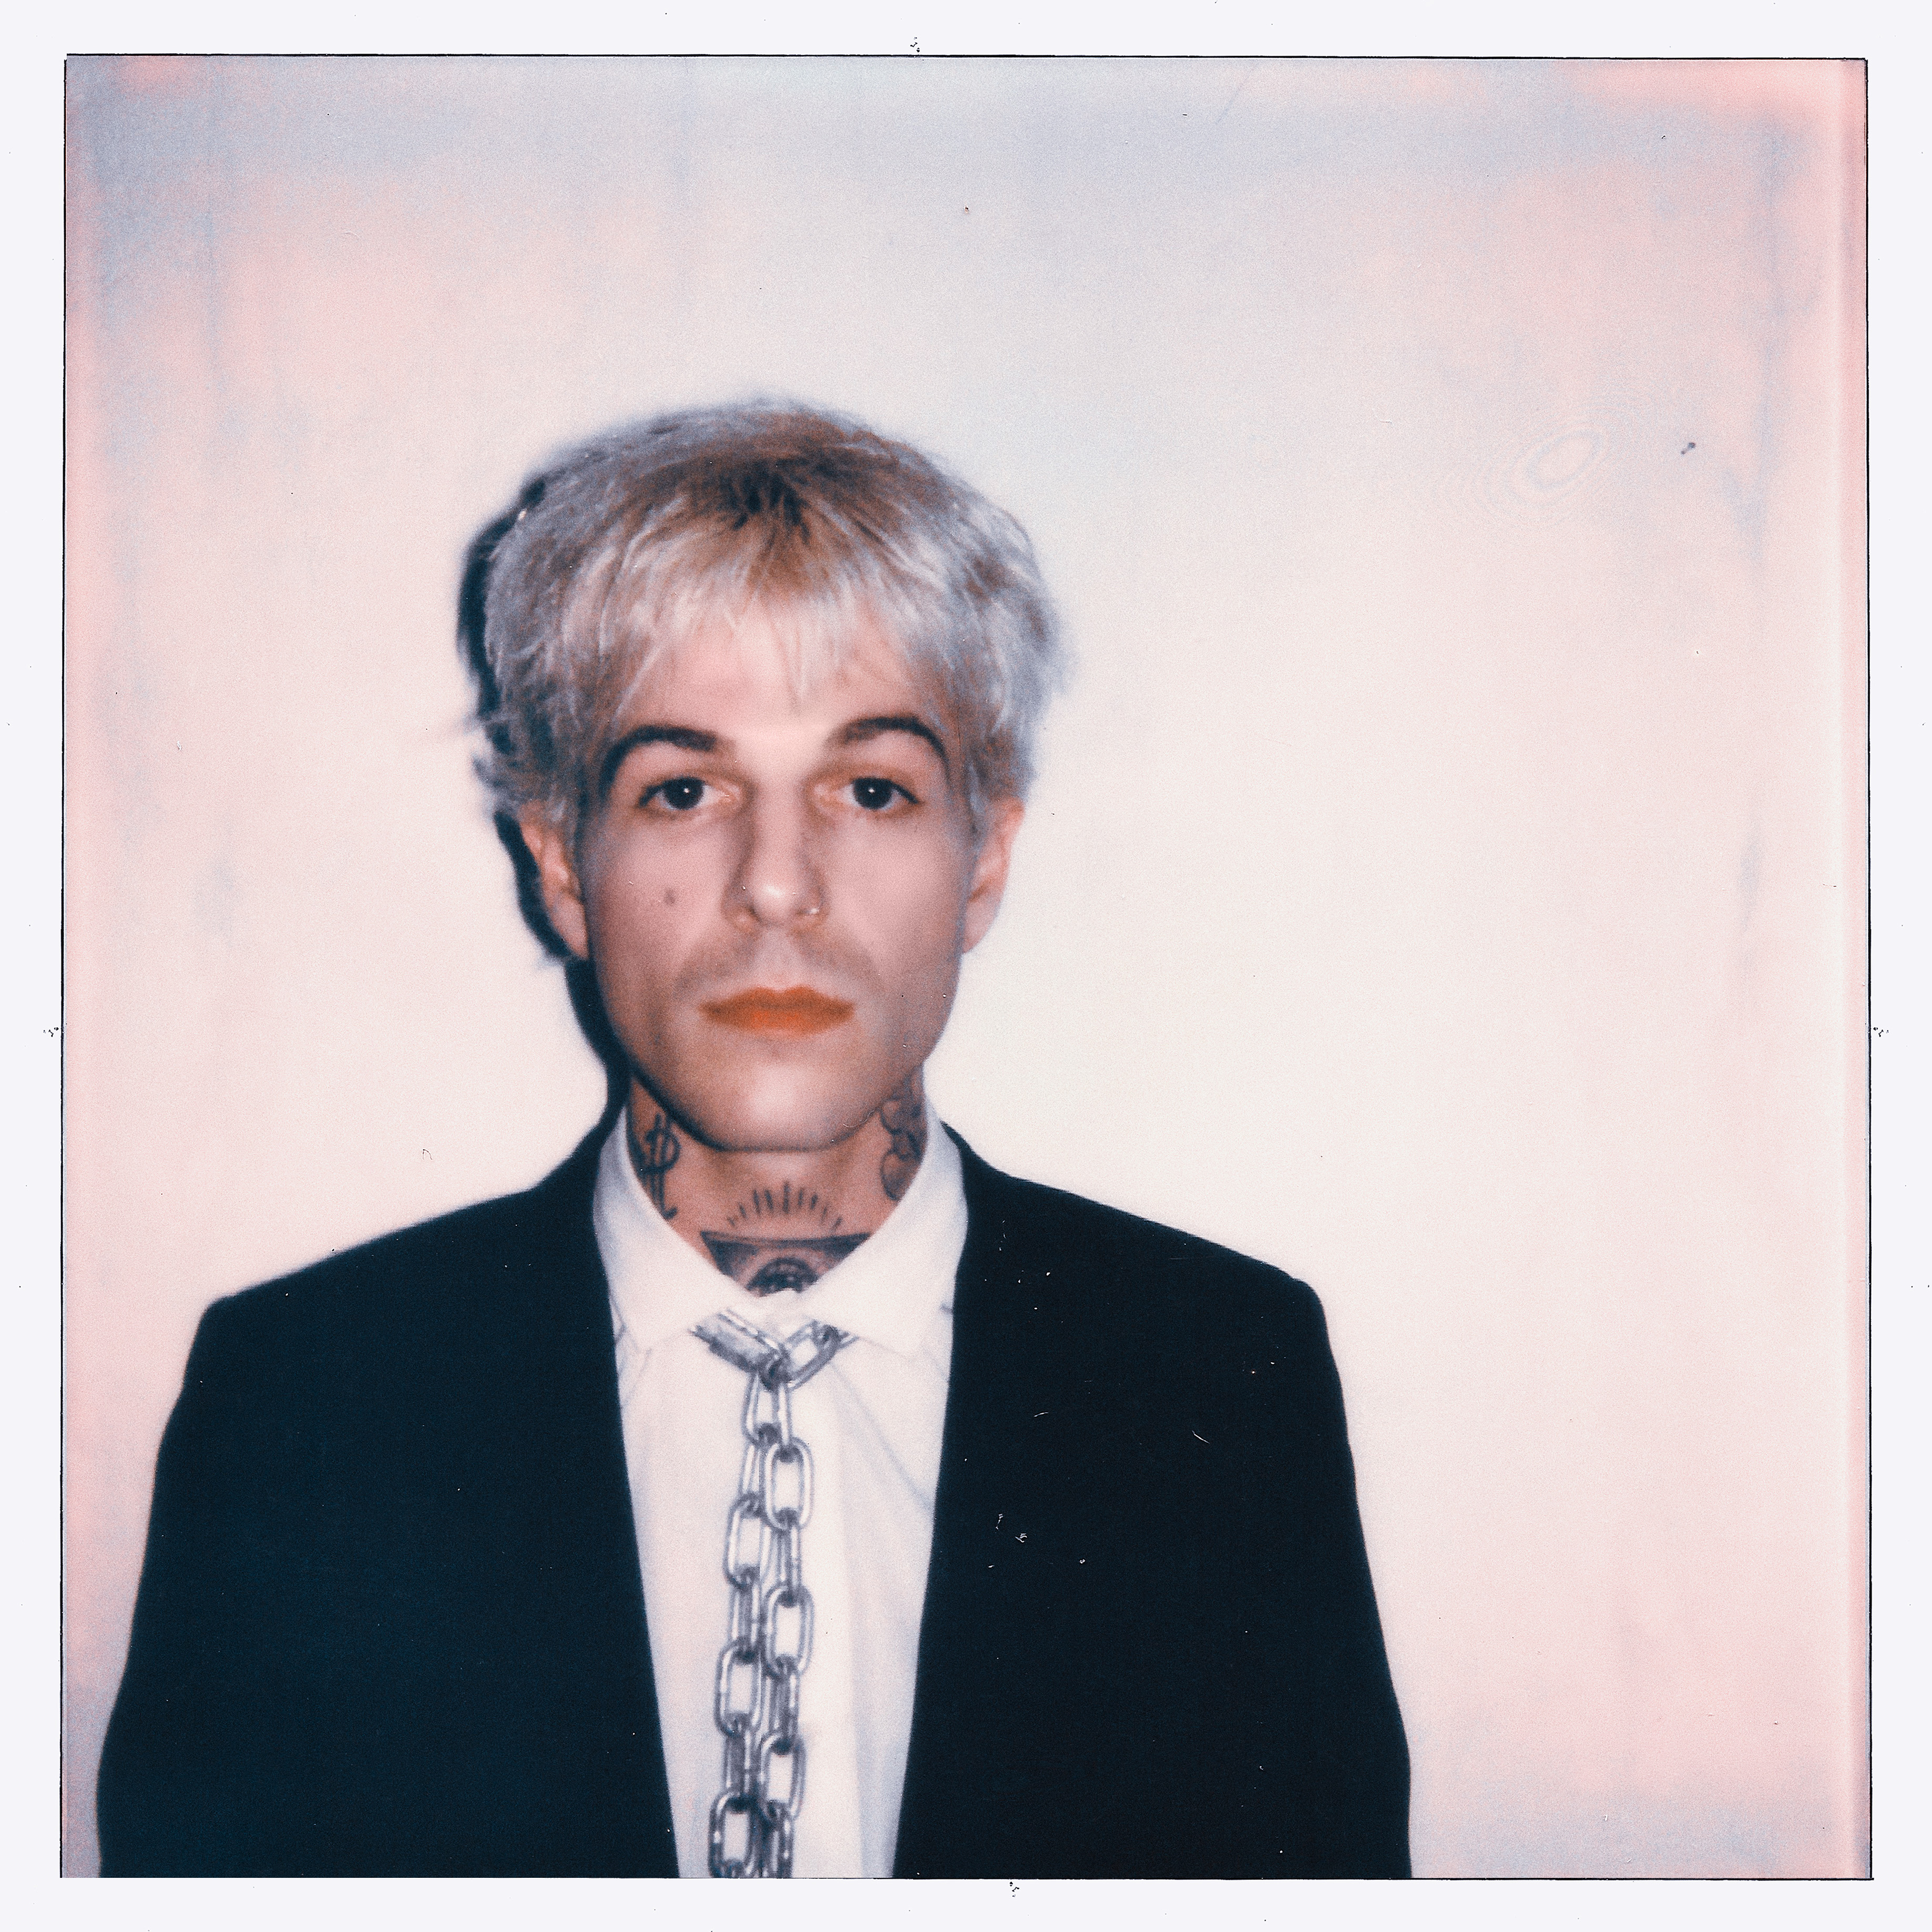 Jesse Rutherford Talks New Solo Music Without The Neighbourhood – Billboard